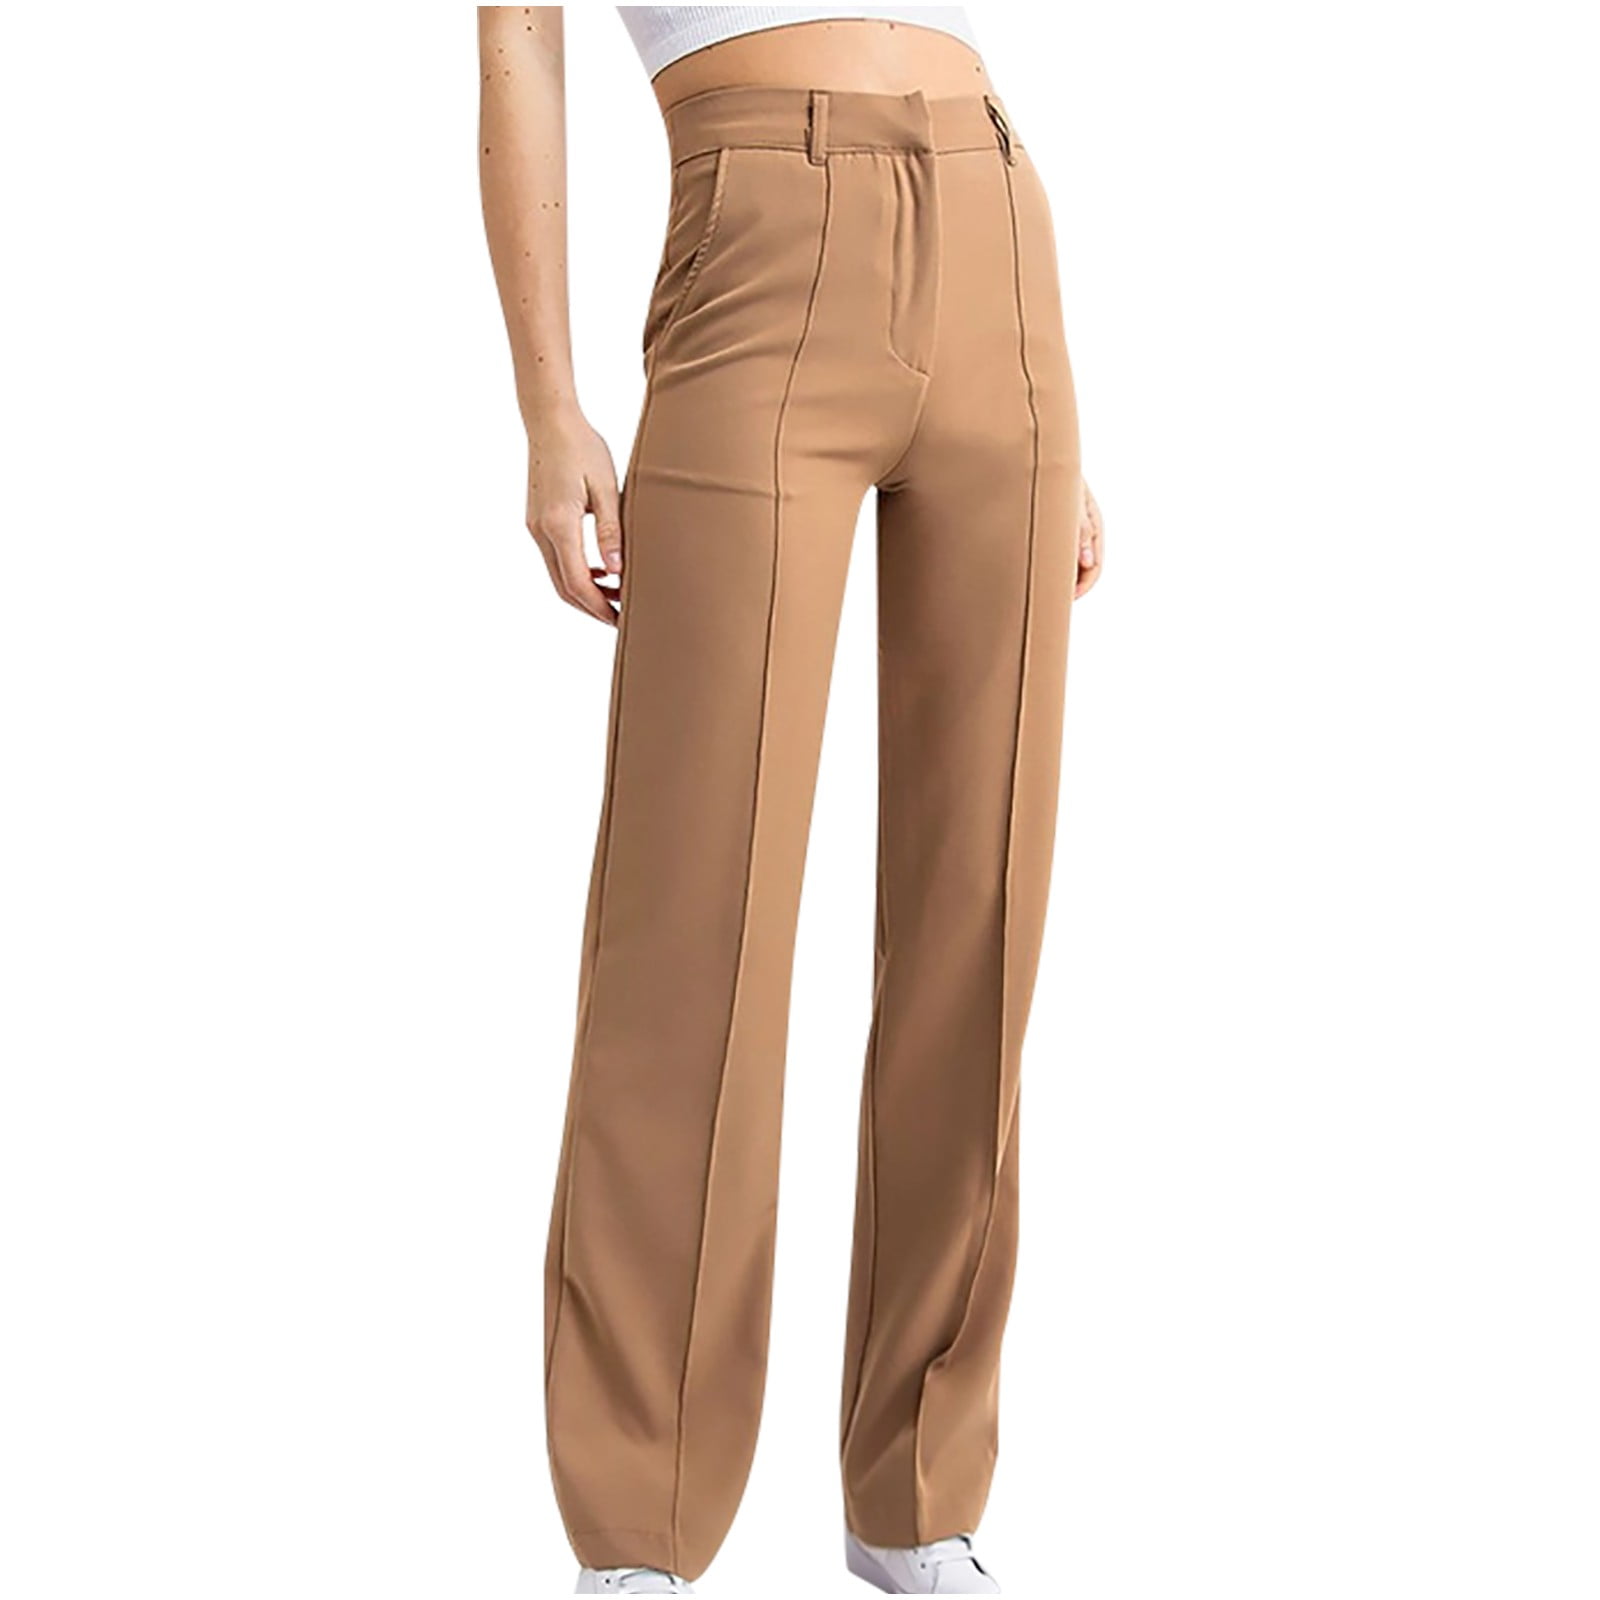 Business Casual Pants for Women Work Office High Waisted Dress Pants ...